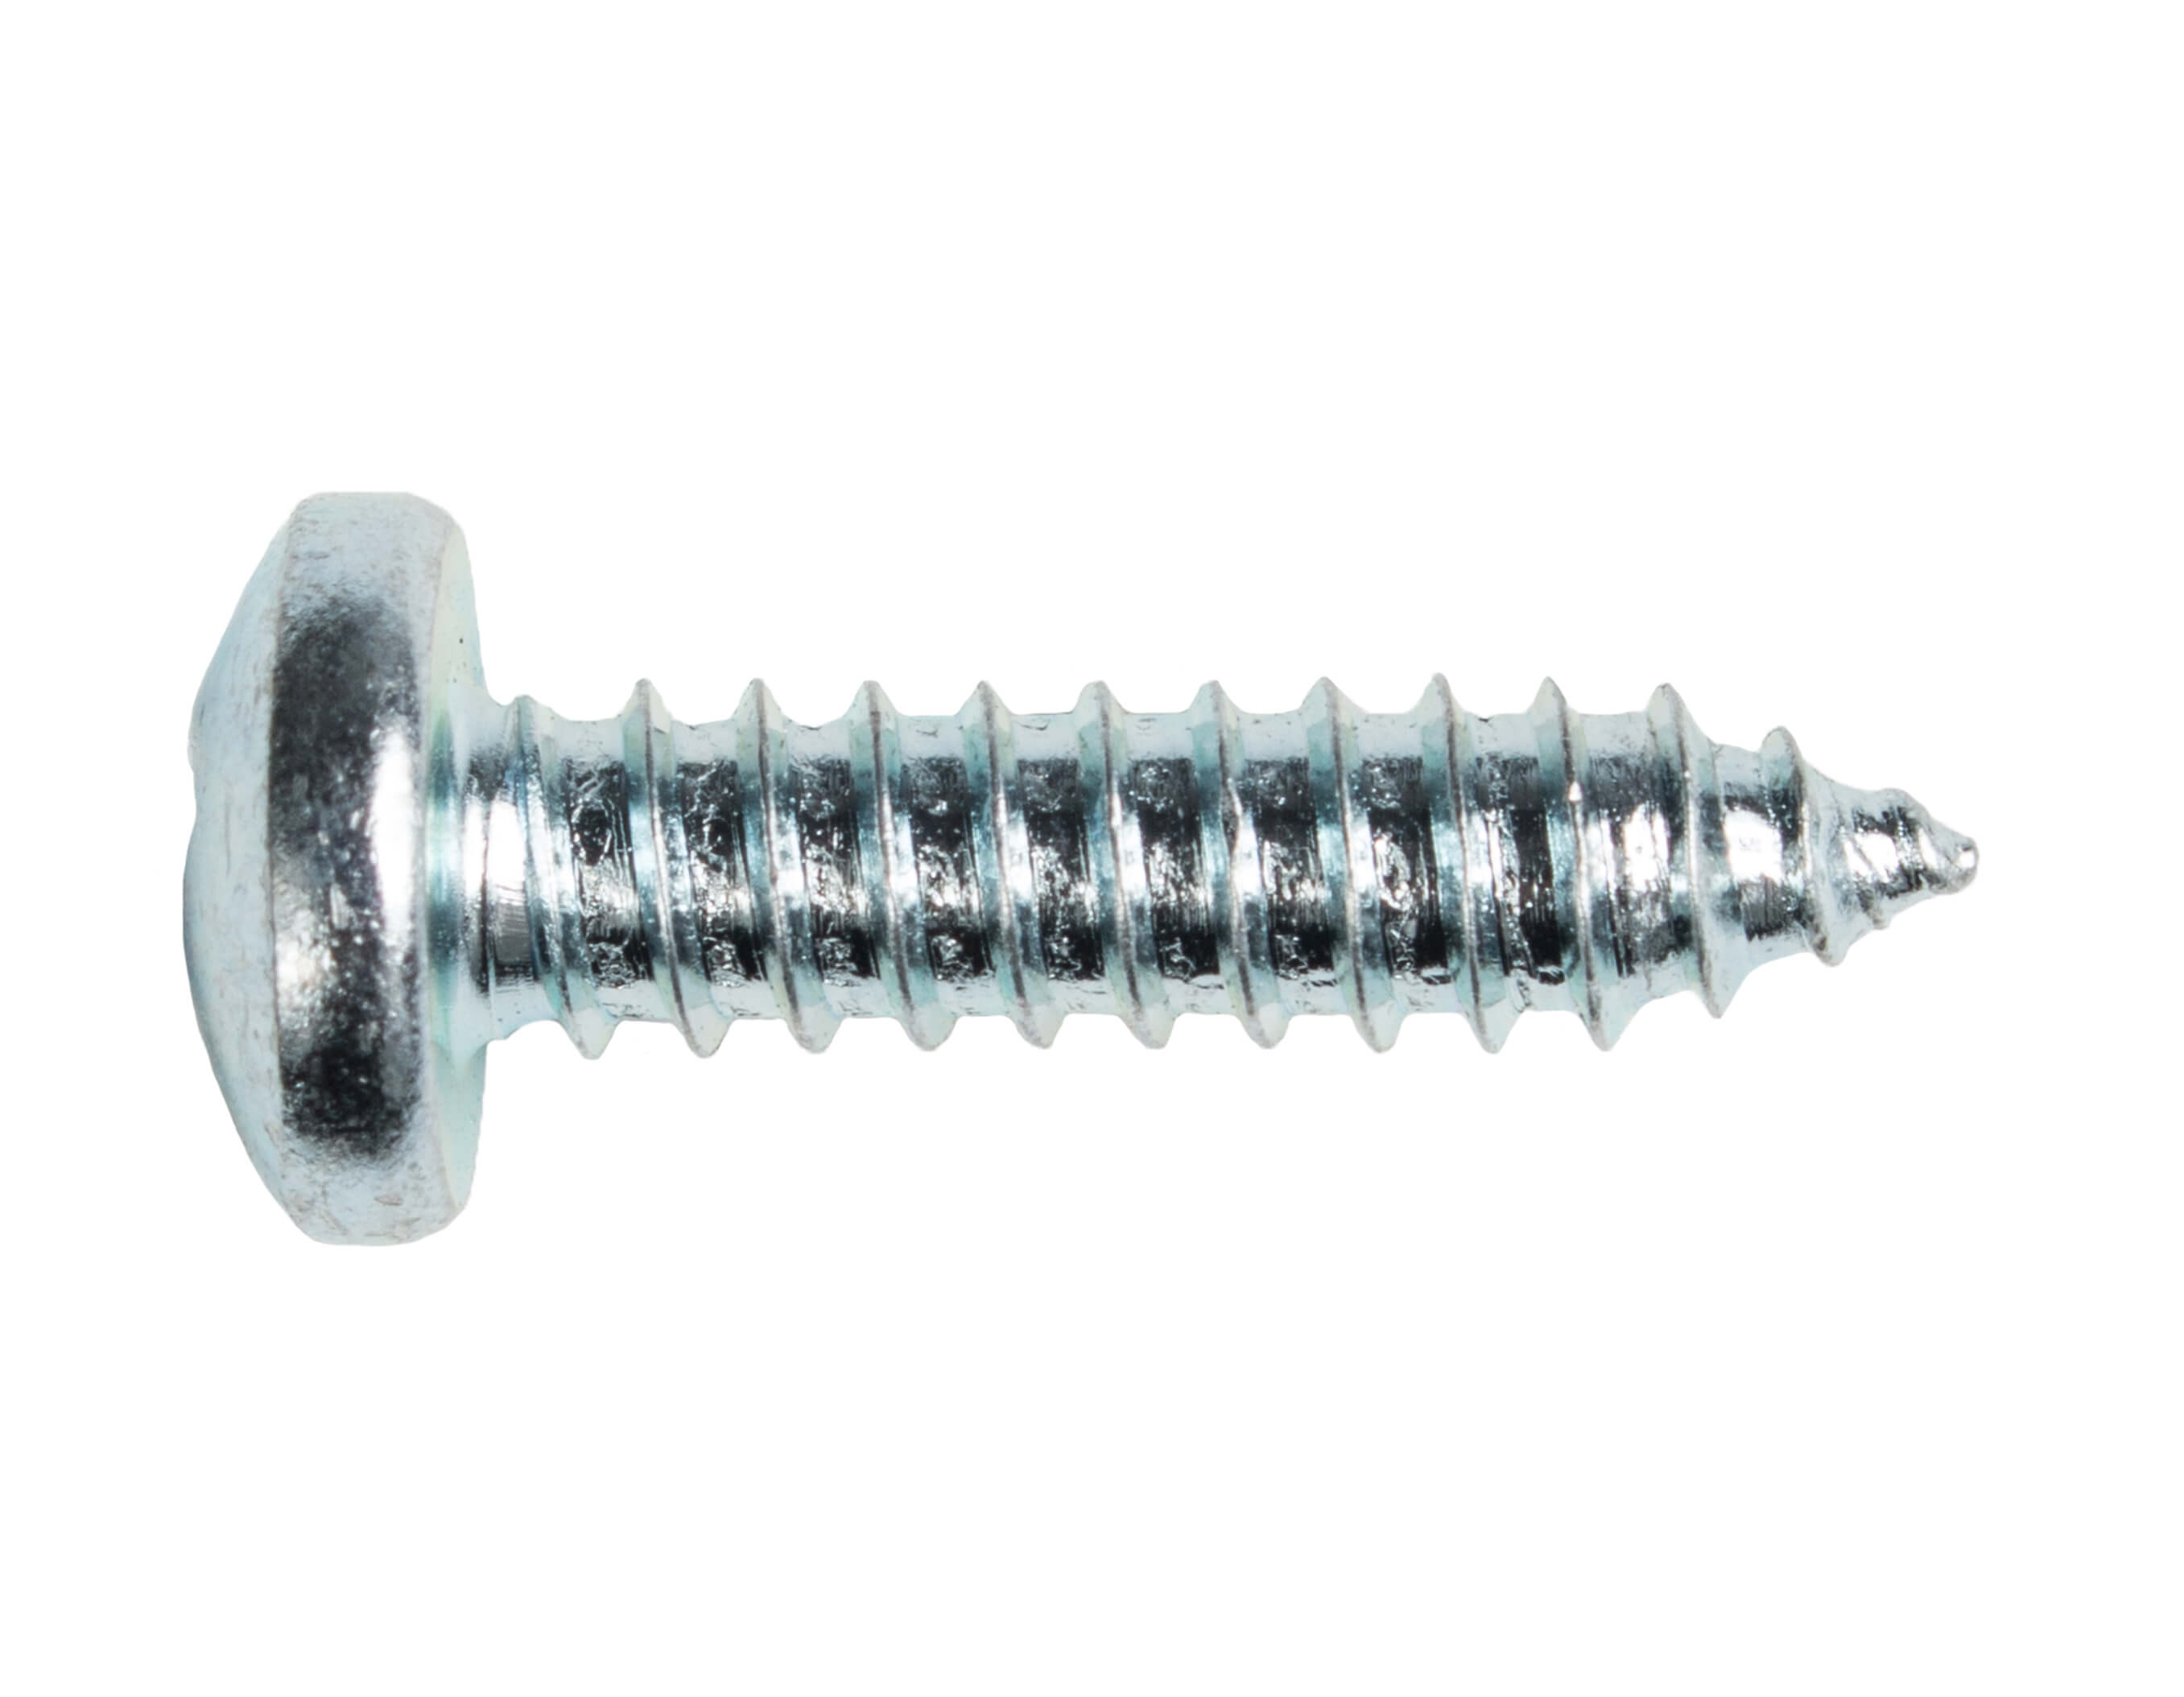 5.5X13 SMS (TAPPING) SCREW PAN PH ZN DIN7981